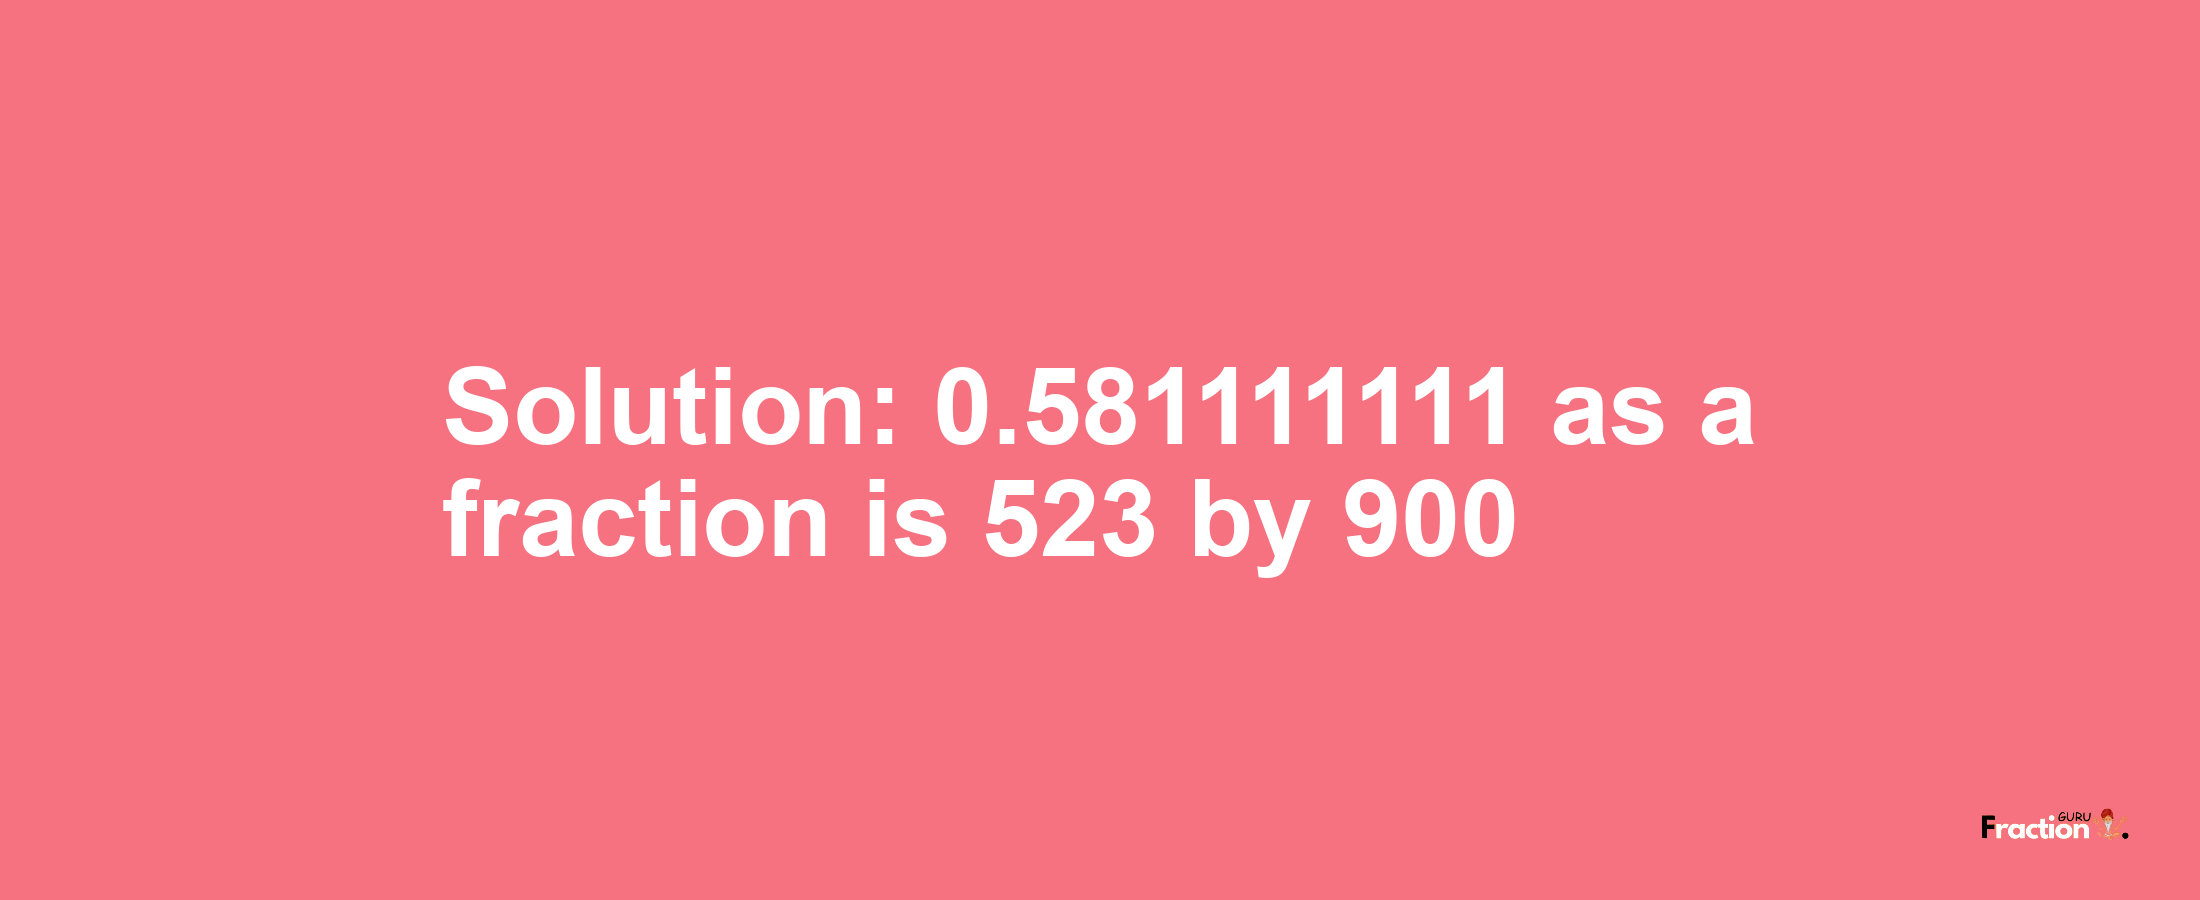 Solution:0.581111111 as a fraction is 523/900